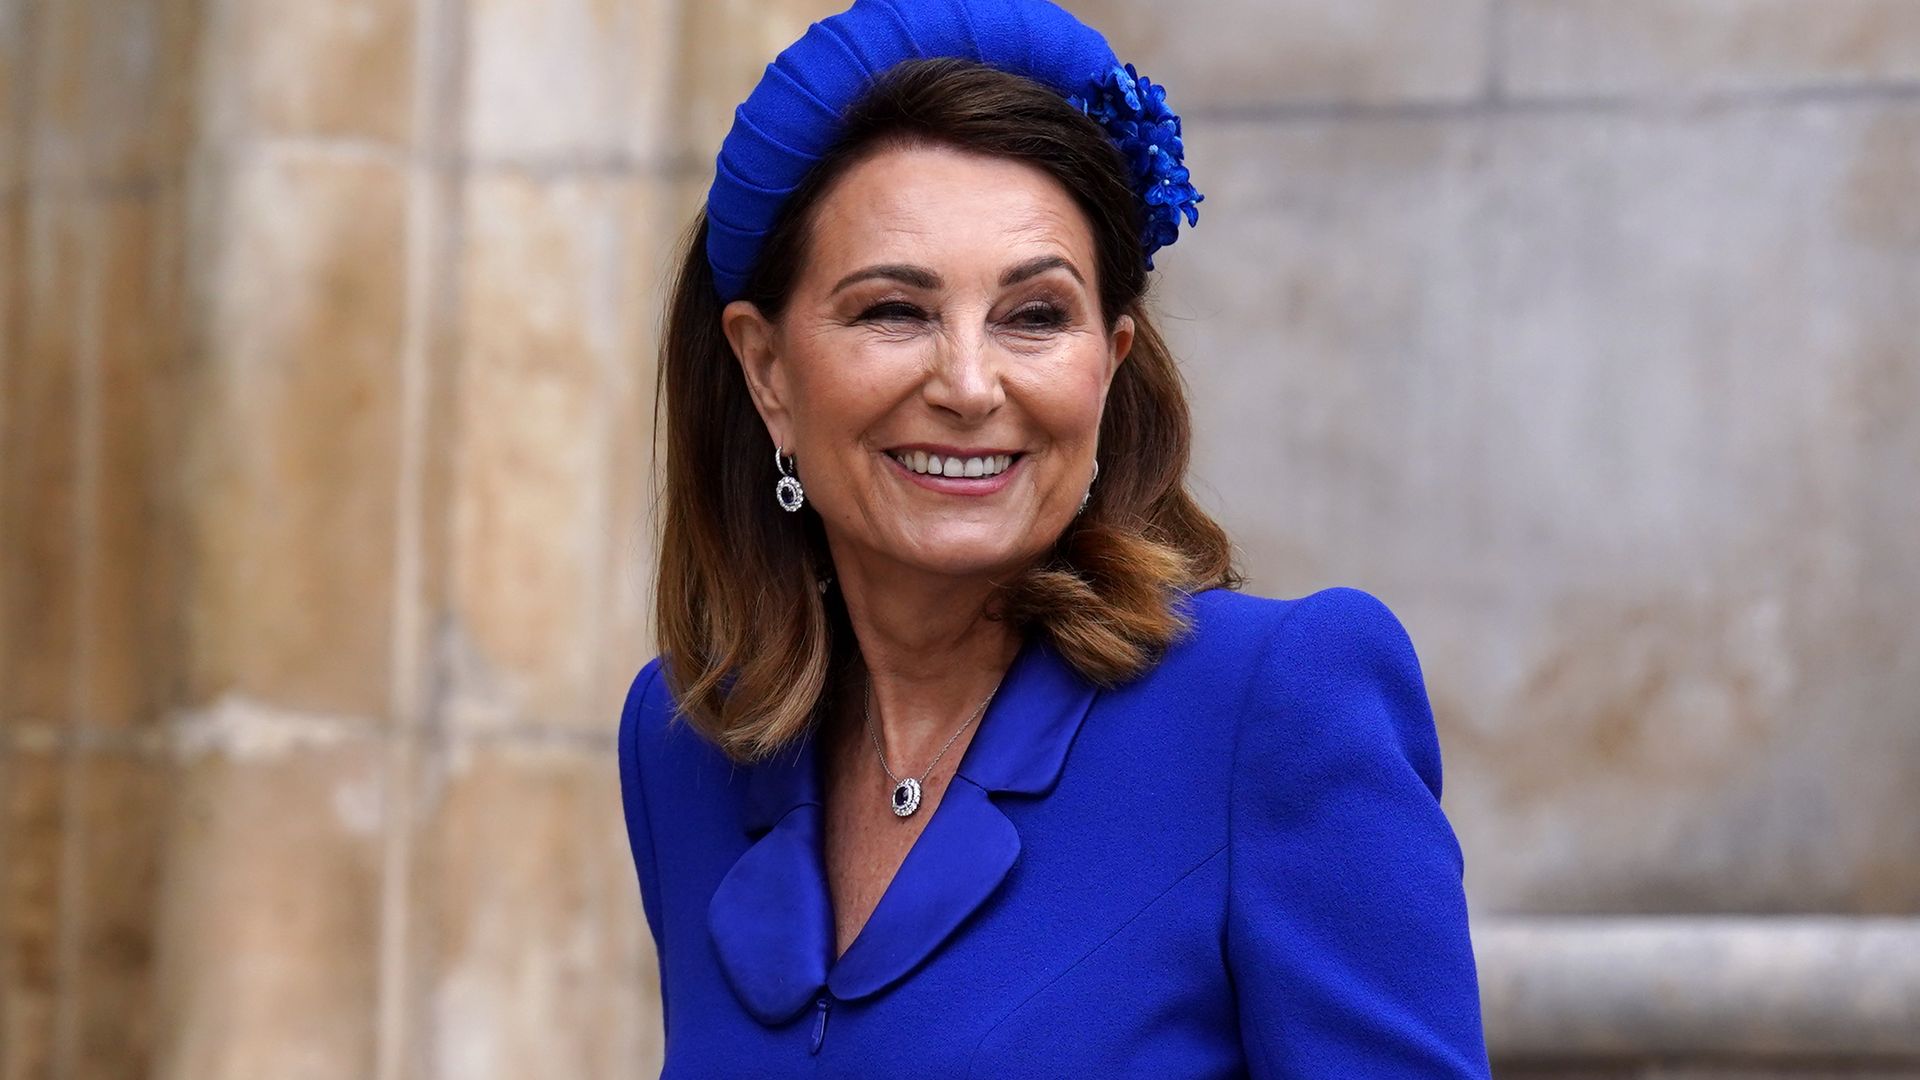 Carole Middleton wows in lace for surprise royal wedding appearance